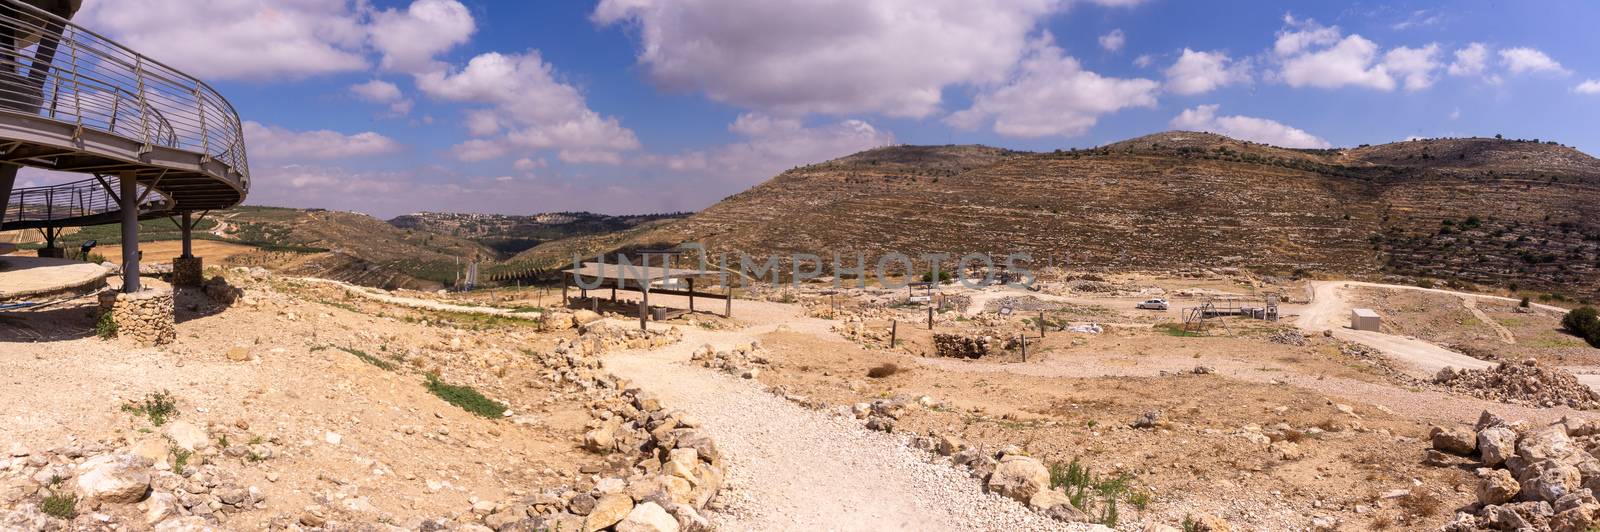 Samaria Shiloh panoramic view in summer tourism by javax